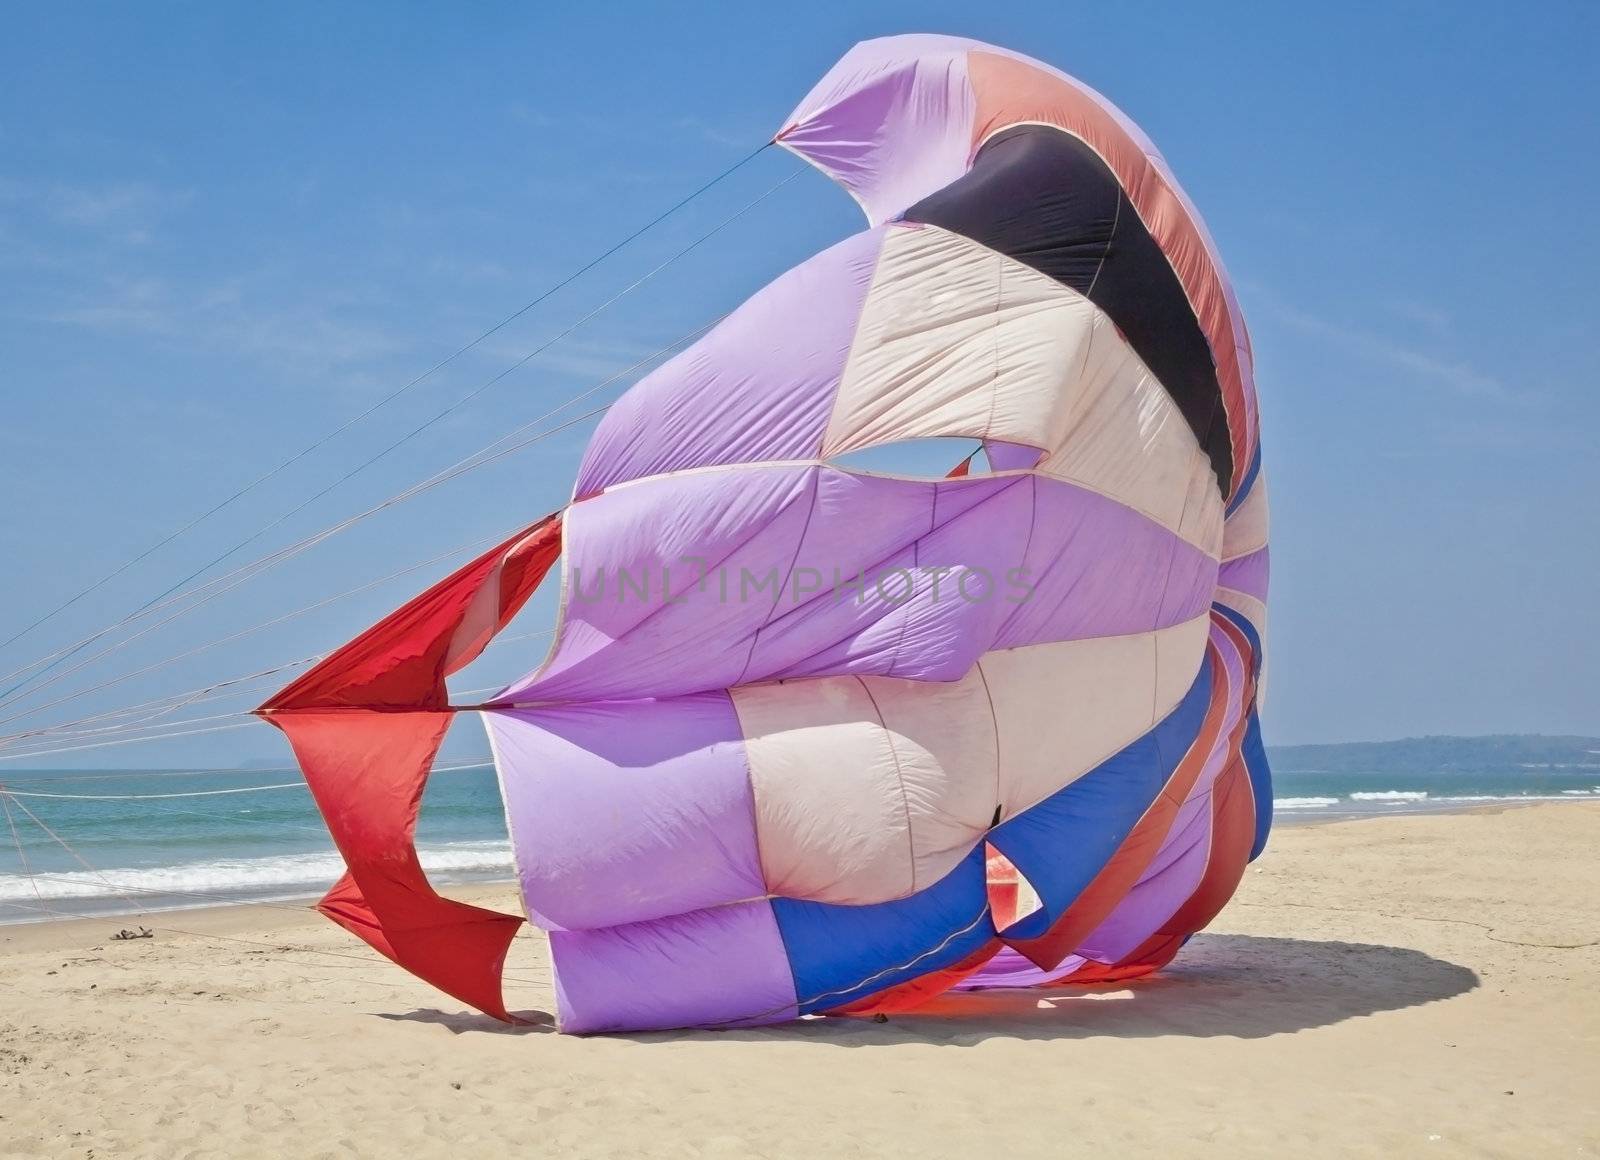 A cropped image from a landscape taken on Goa Beach of a parachute being made ready for parasailing